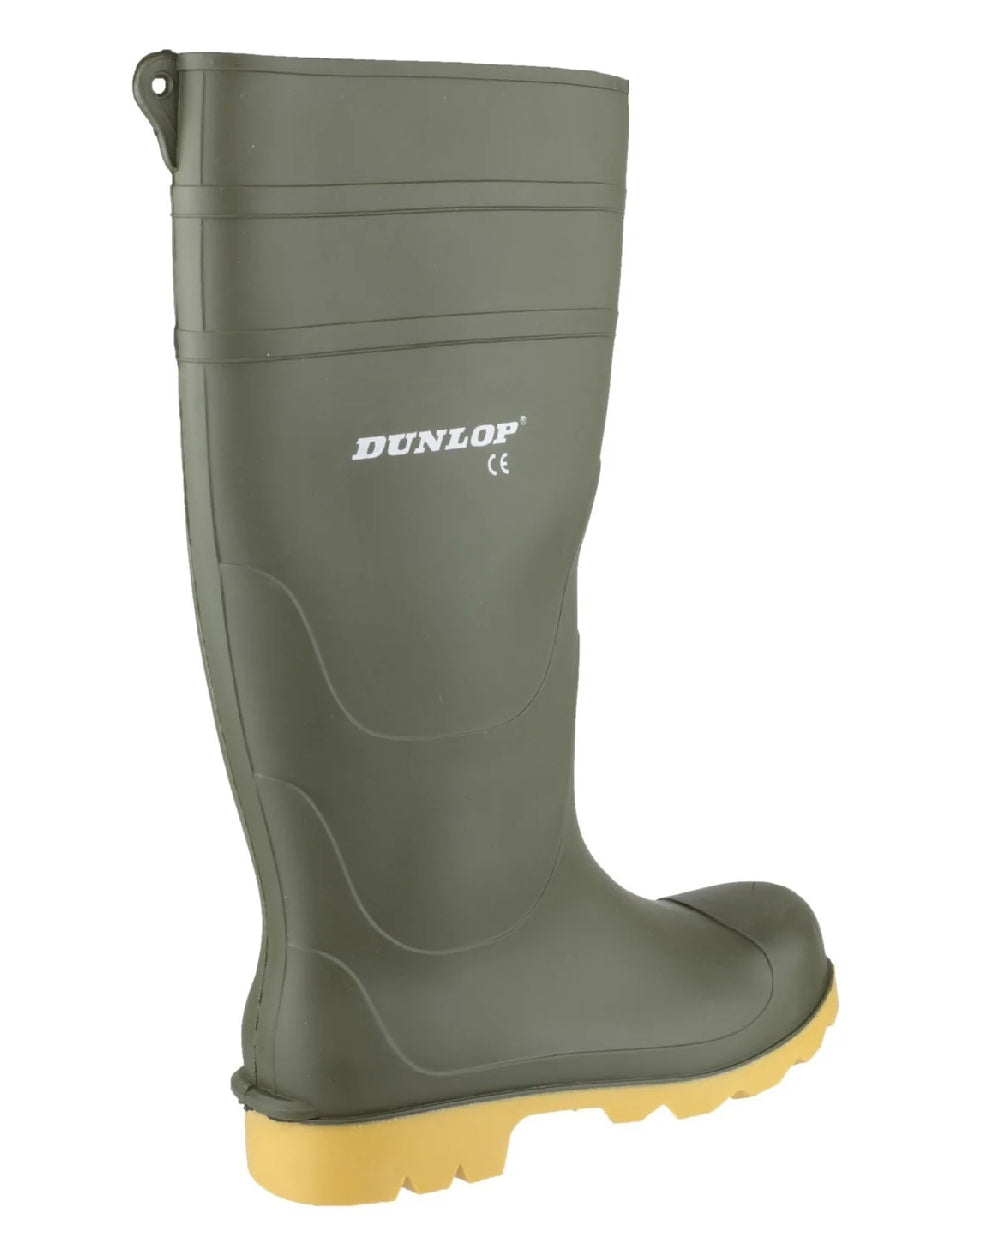 Green coloured Dunlop Universal Wellingtons on white background 